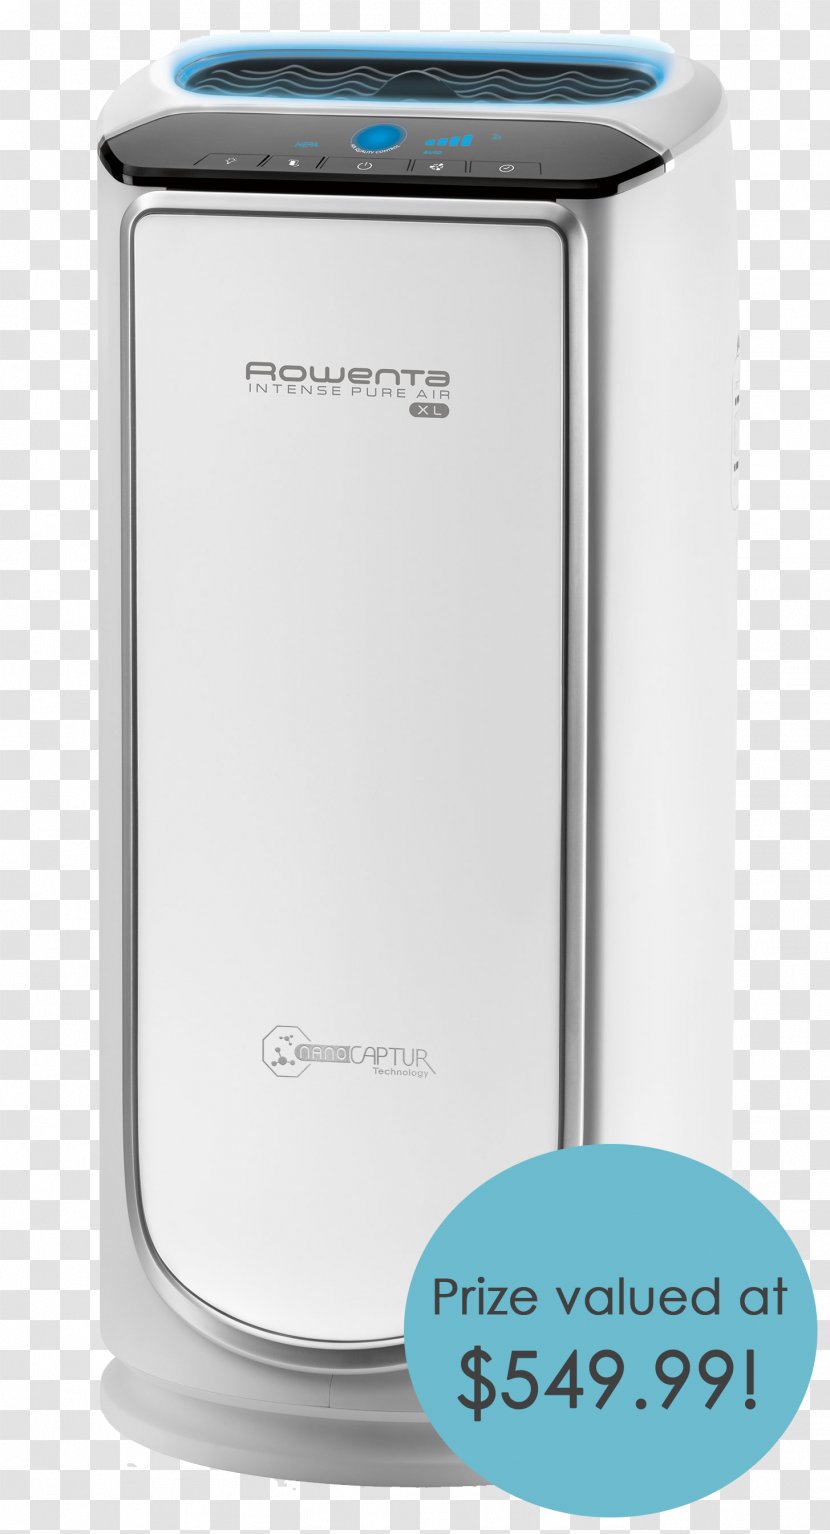 Home Appliance Air Purifiers Rowenta 835 Sq. Ft. Intense Pure Purifier Pu4020 Conditioning - Fan Transparent PNG